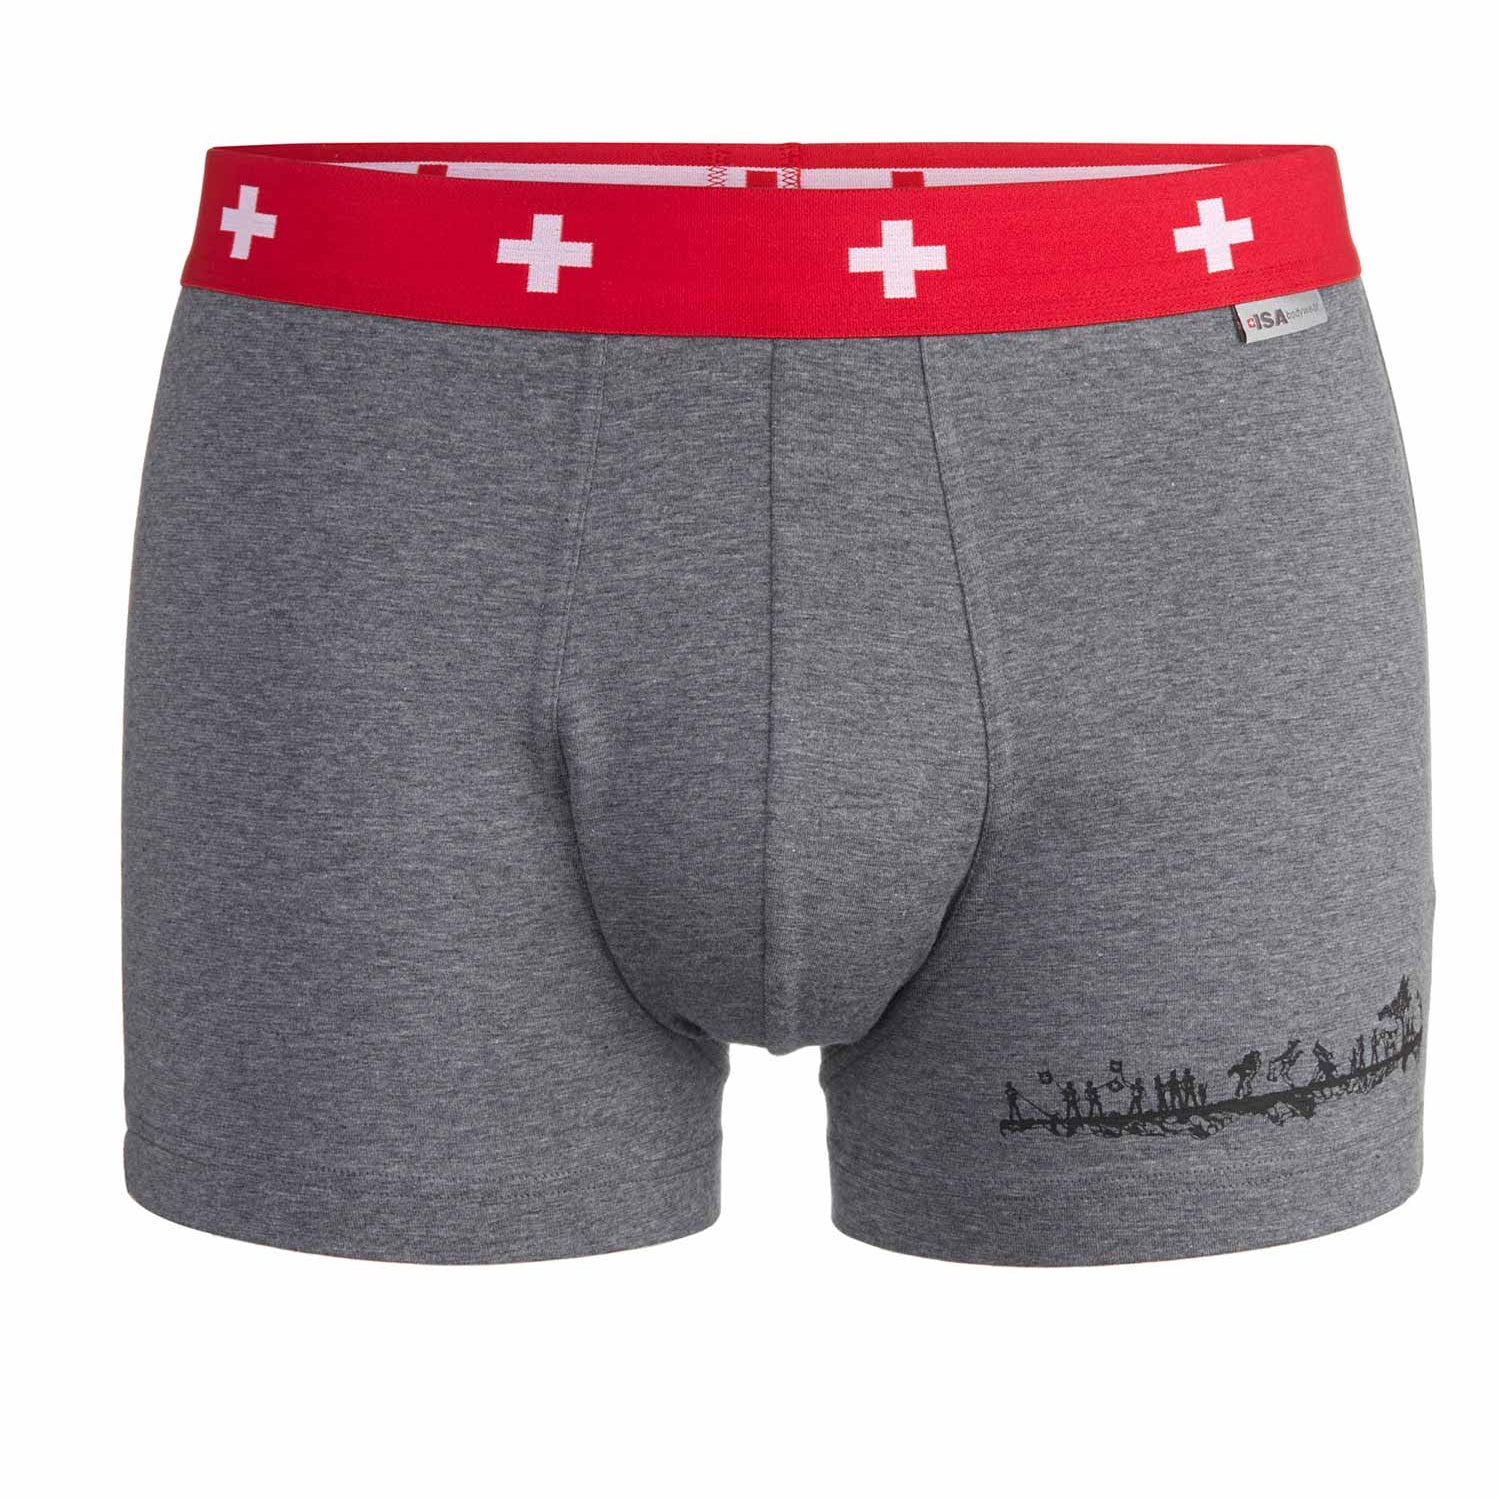 Pant Andy SCHWINGER in grau mit rot